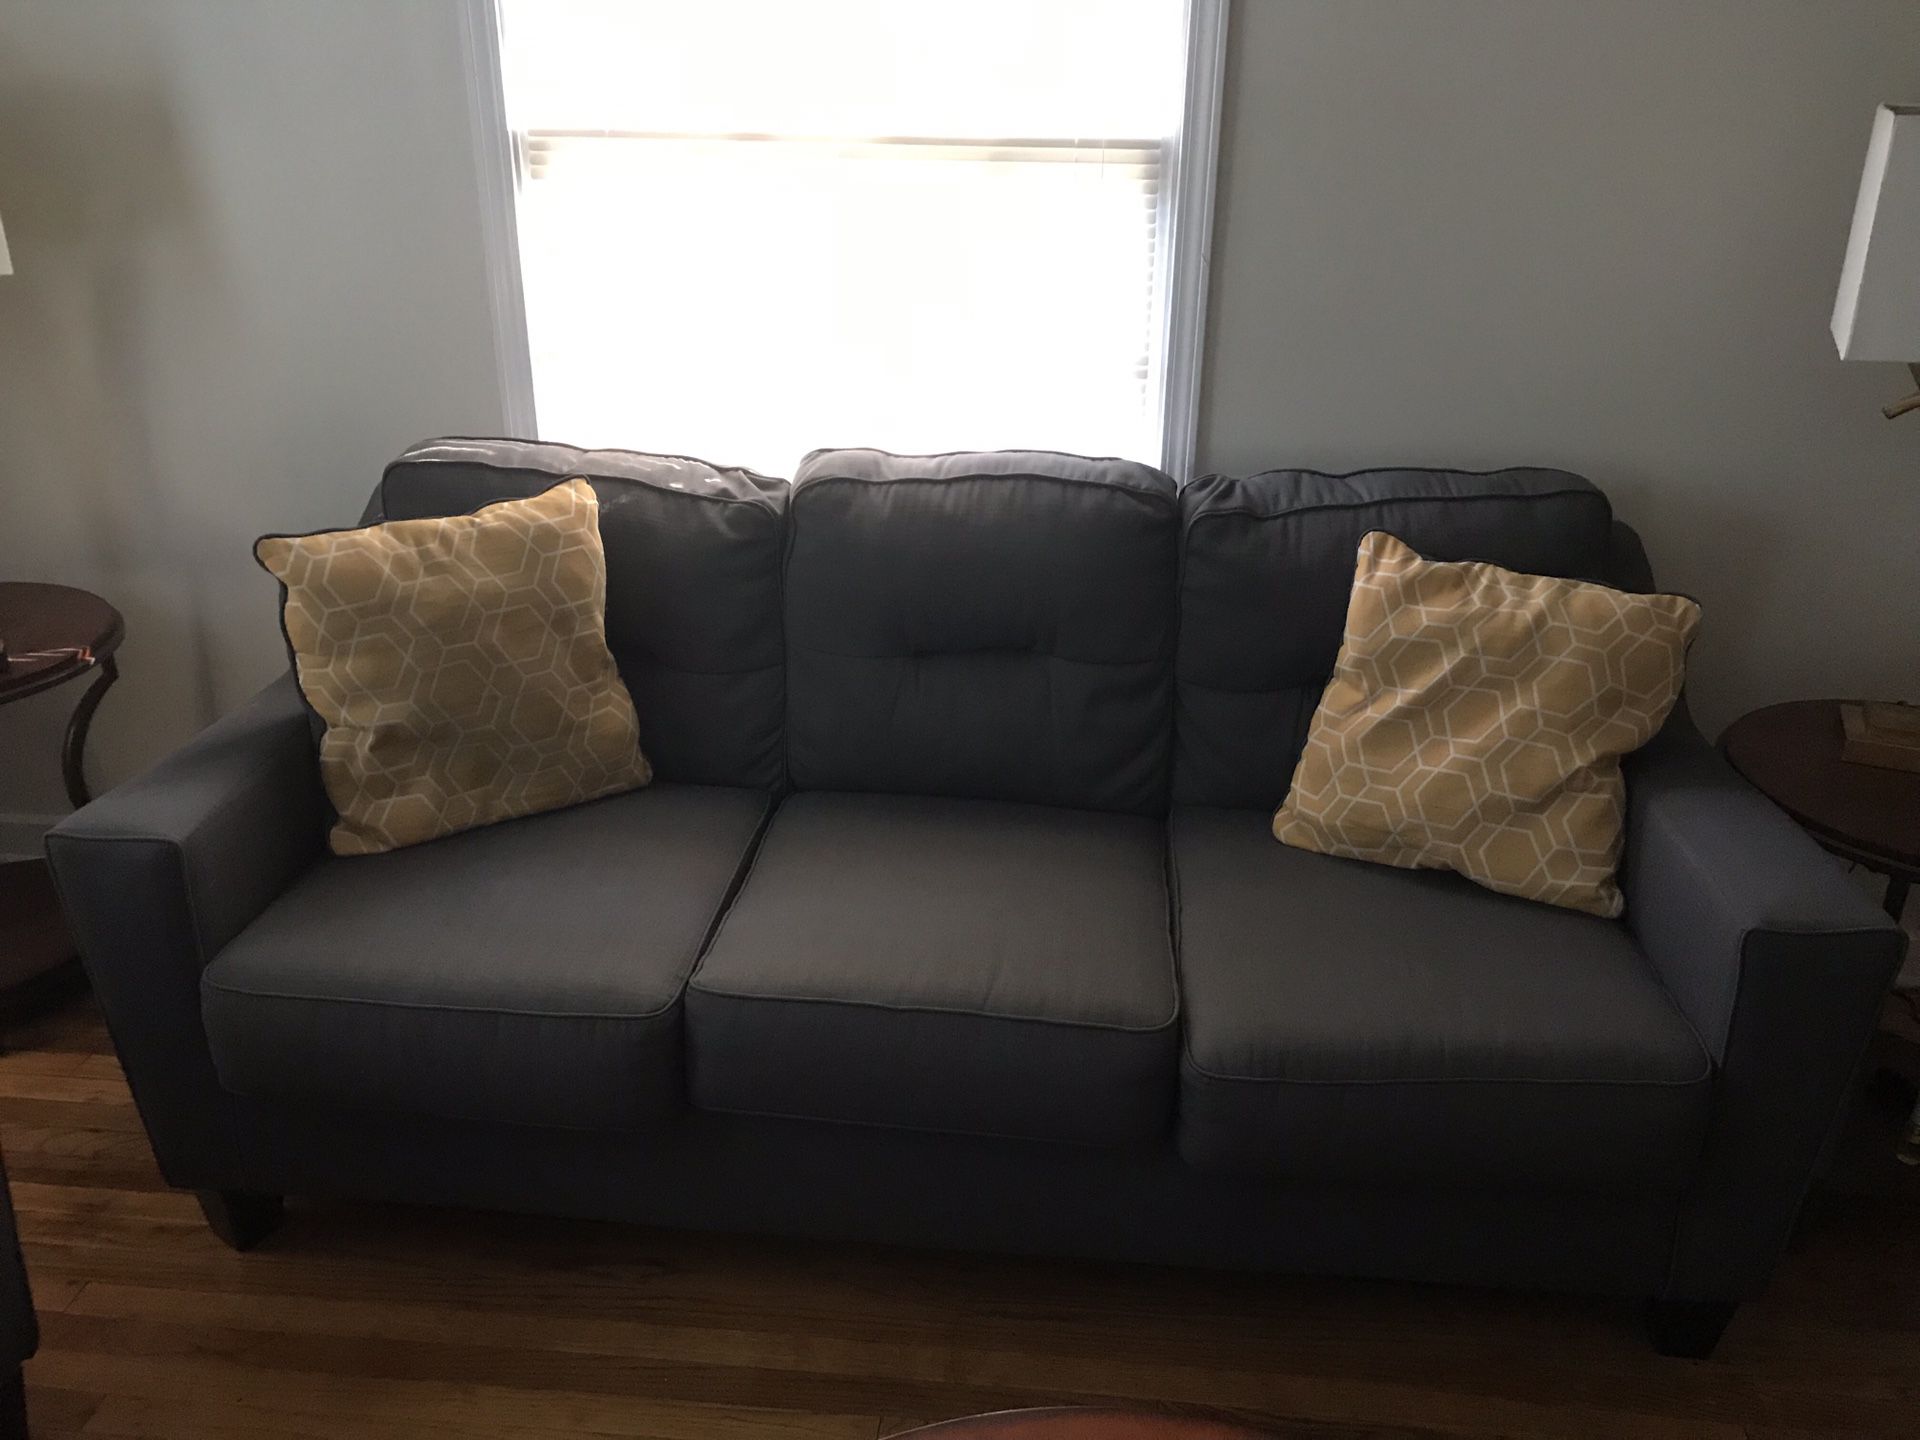 Almost new LIVING ROOM SET